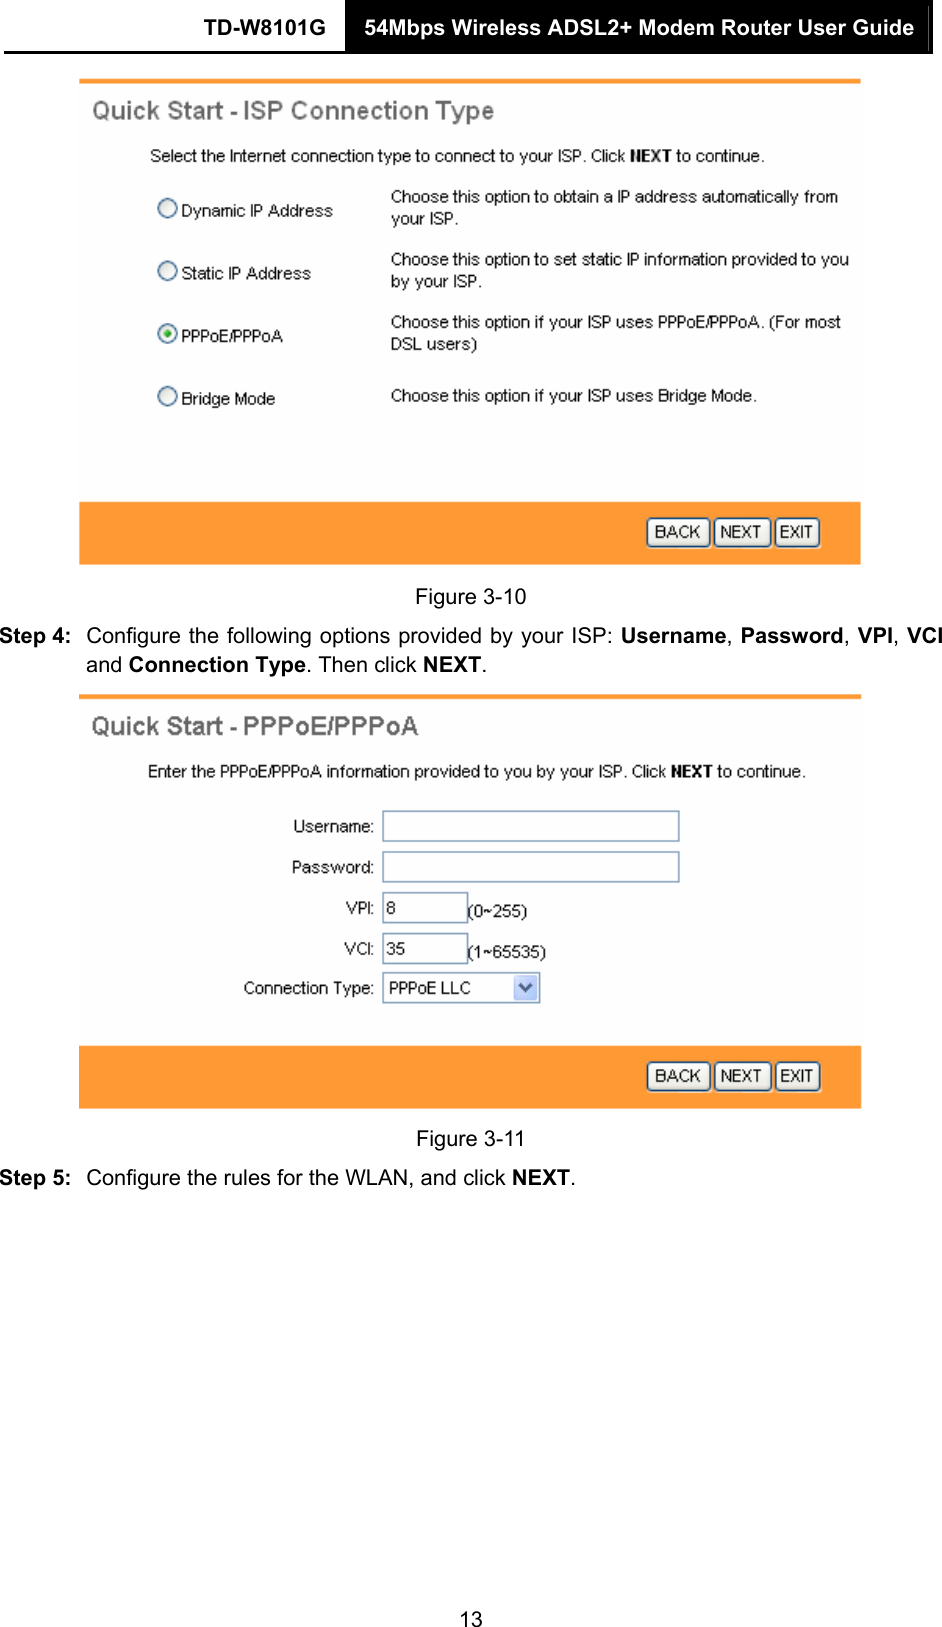 TD-W8101G  54Mbps Wireless ADSL2+ Modem Router User Guide  13 Figure 3-10 Step 4:  Configure the following options provided by your ISP: Username, Password, VPI, VCI and Connection Type. Then click NEXT.  Figure 3-11 Step 5:  Configure the rules for the WLAN, and click NEXT. 